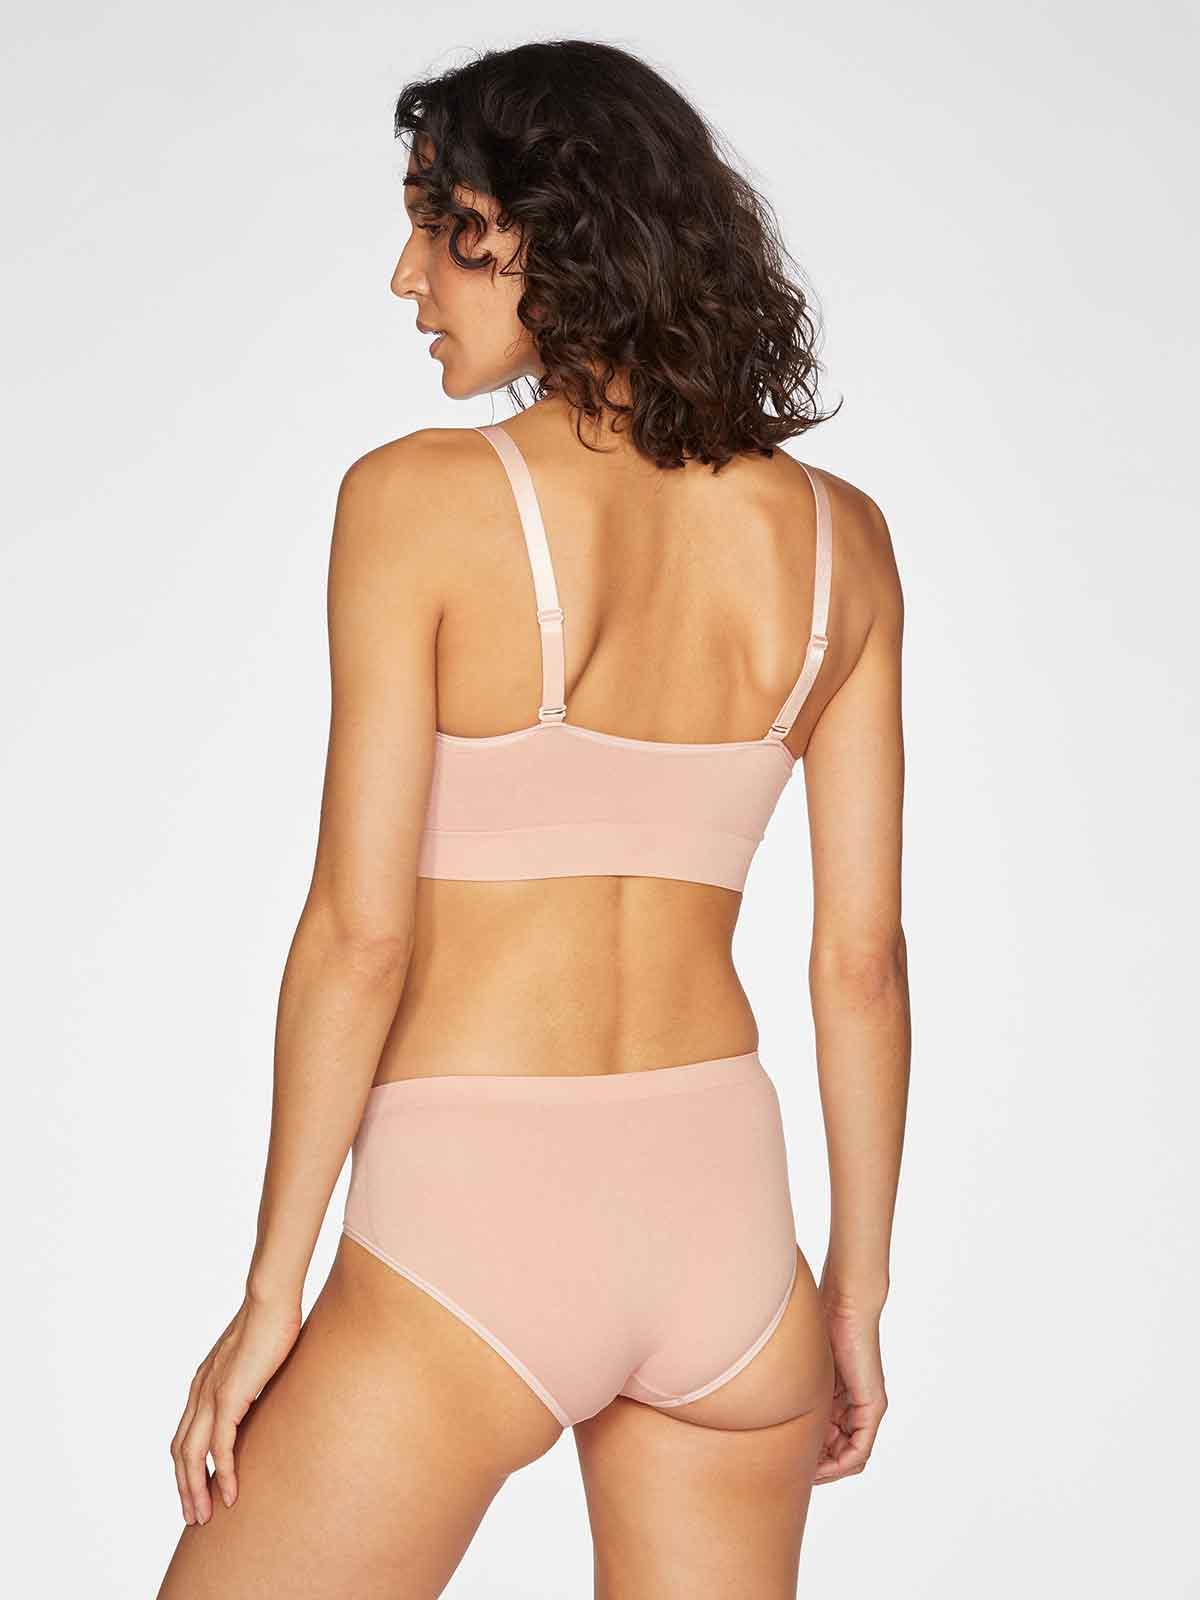 Recycled Nylon Seamless Thong in Blush Pink